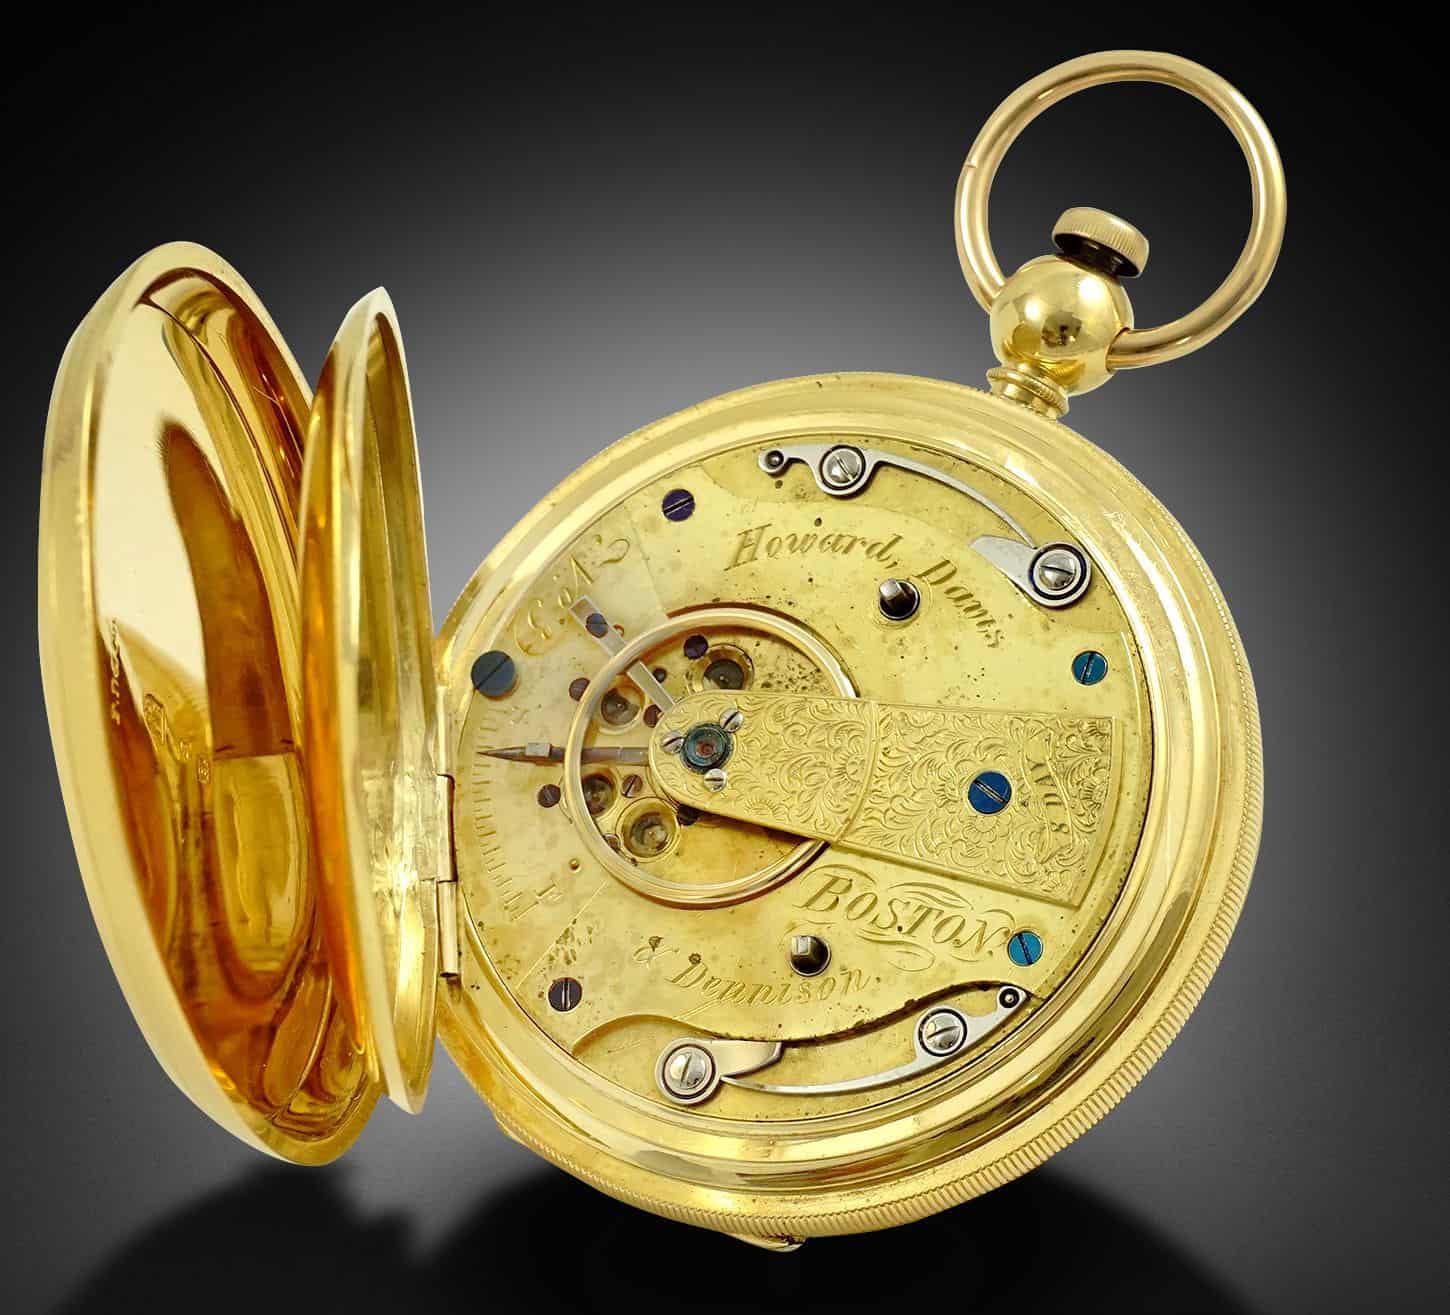 Watches, Stories, and Gear: American Watchmaking Edition